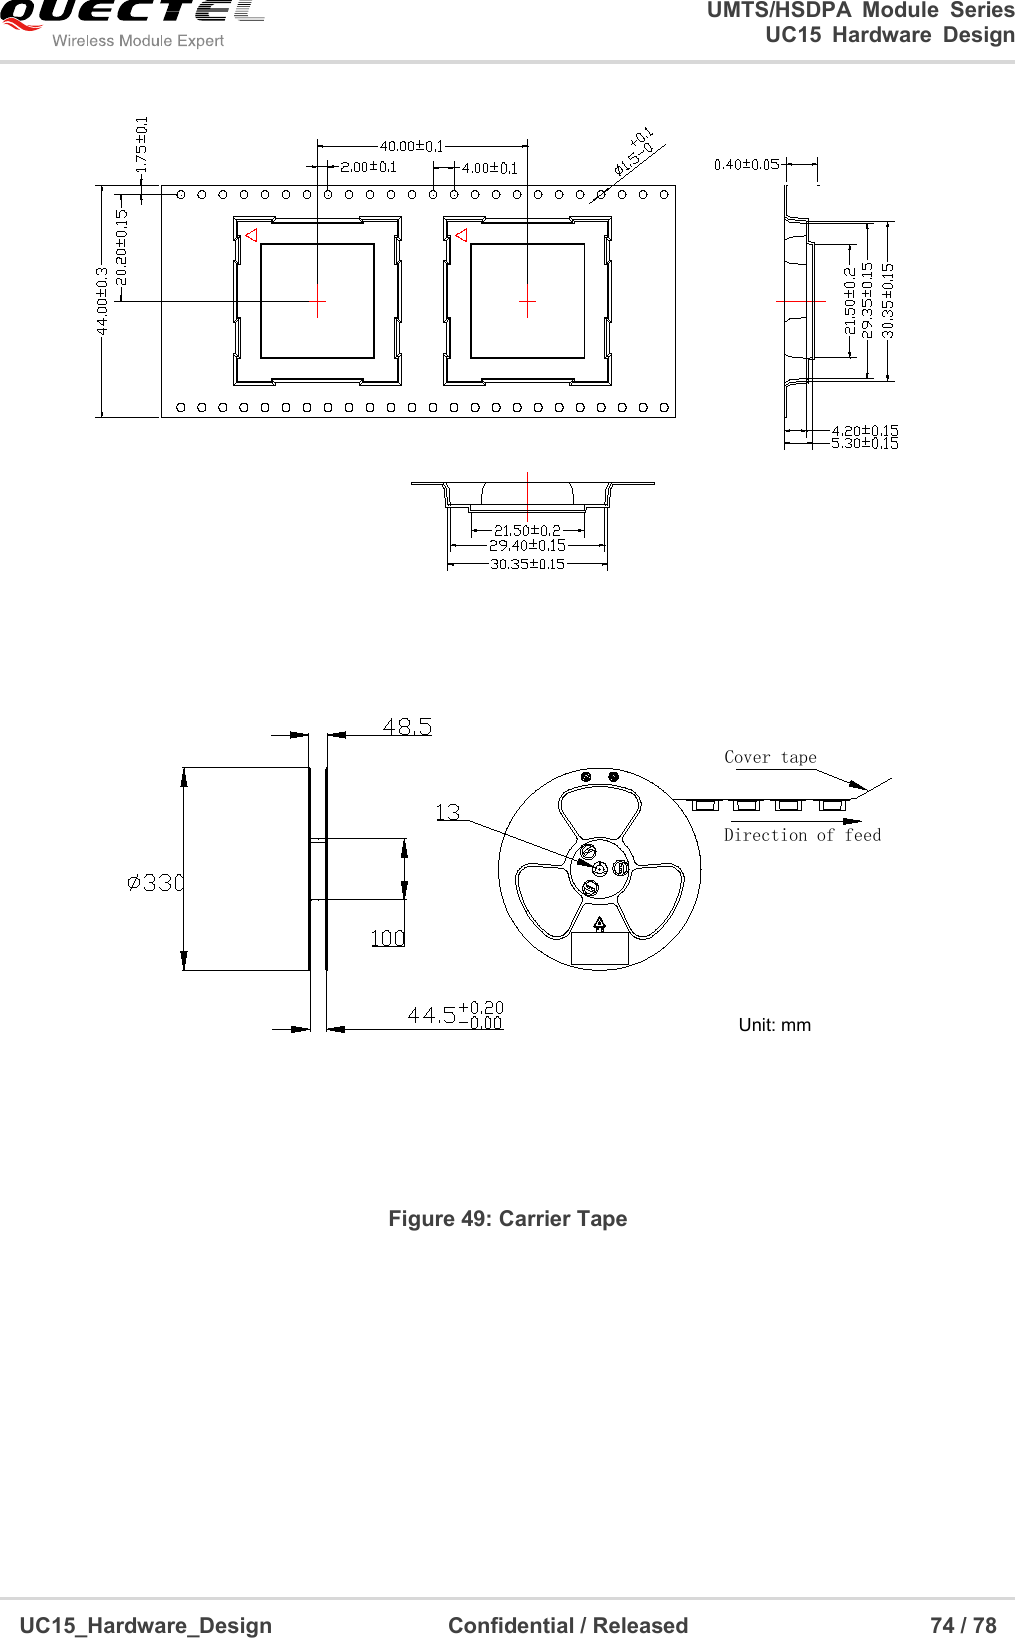                                                                        UMTS/HSDPA  Module  Series                                                                 UC15 Hardware Design  UC15_Hardware_Design                                Confidential / Released                                            74 / 78     Unit: mmDirection of feedCover tape   Figure 49: Carrier Tape  